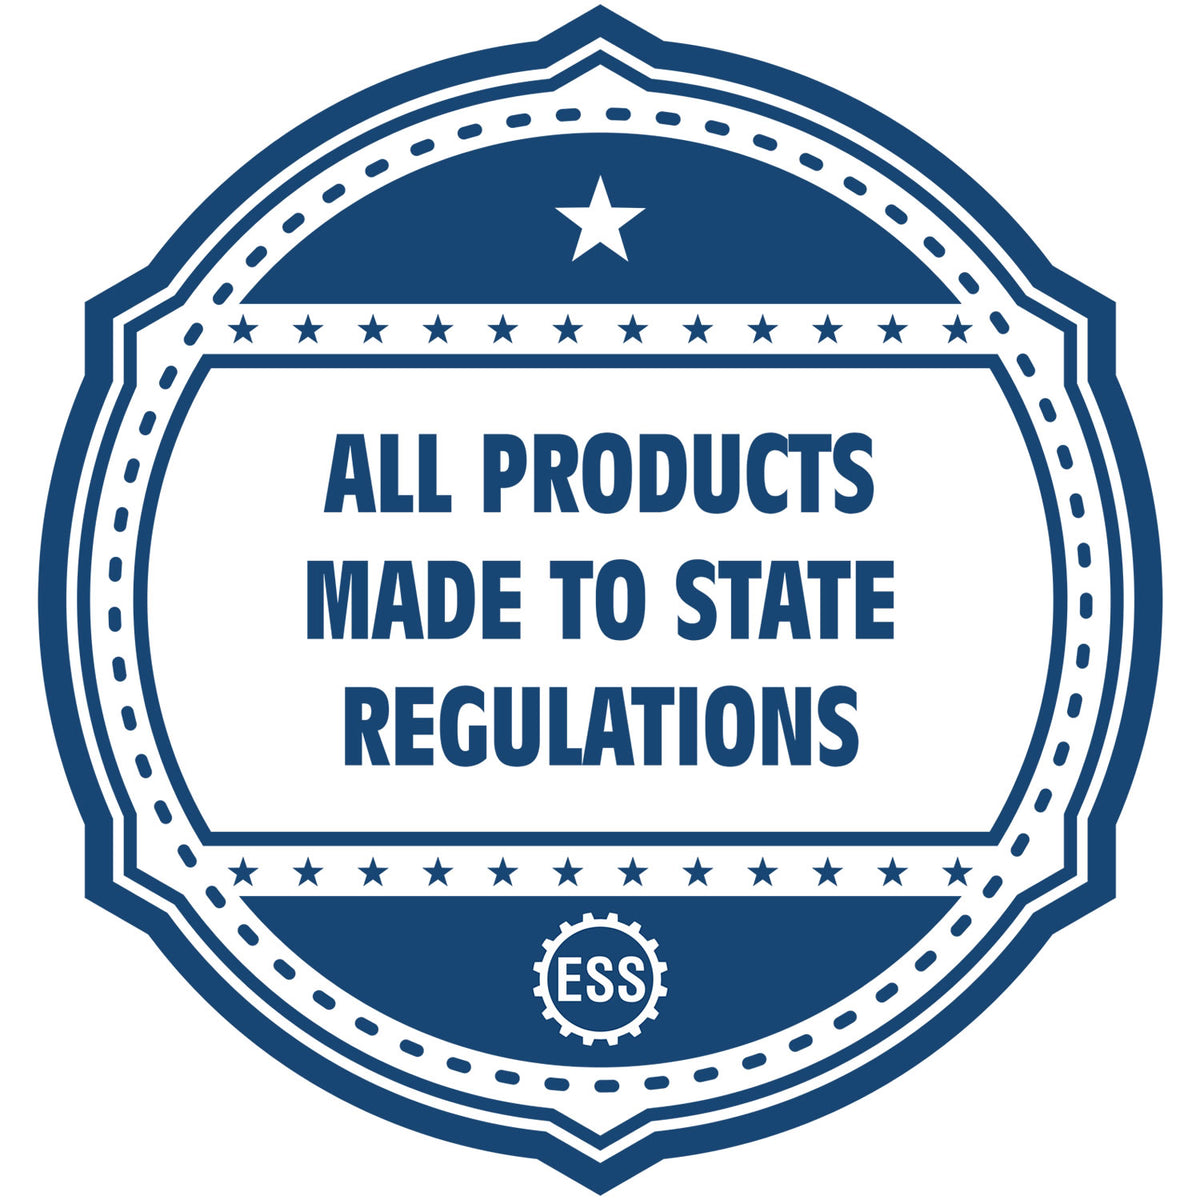 An icon or badge element for the PSI Kentucky Notary Stamp showing that this product is made in compliance with state regulations.